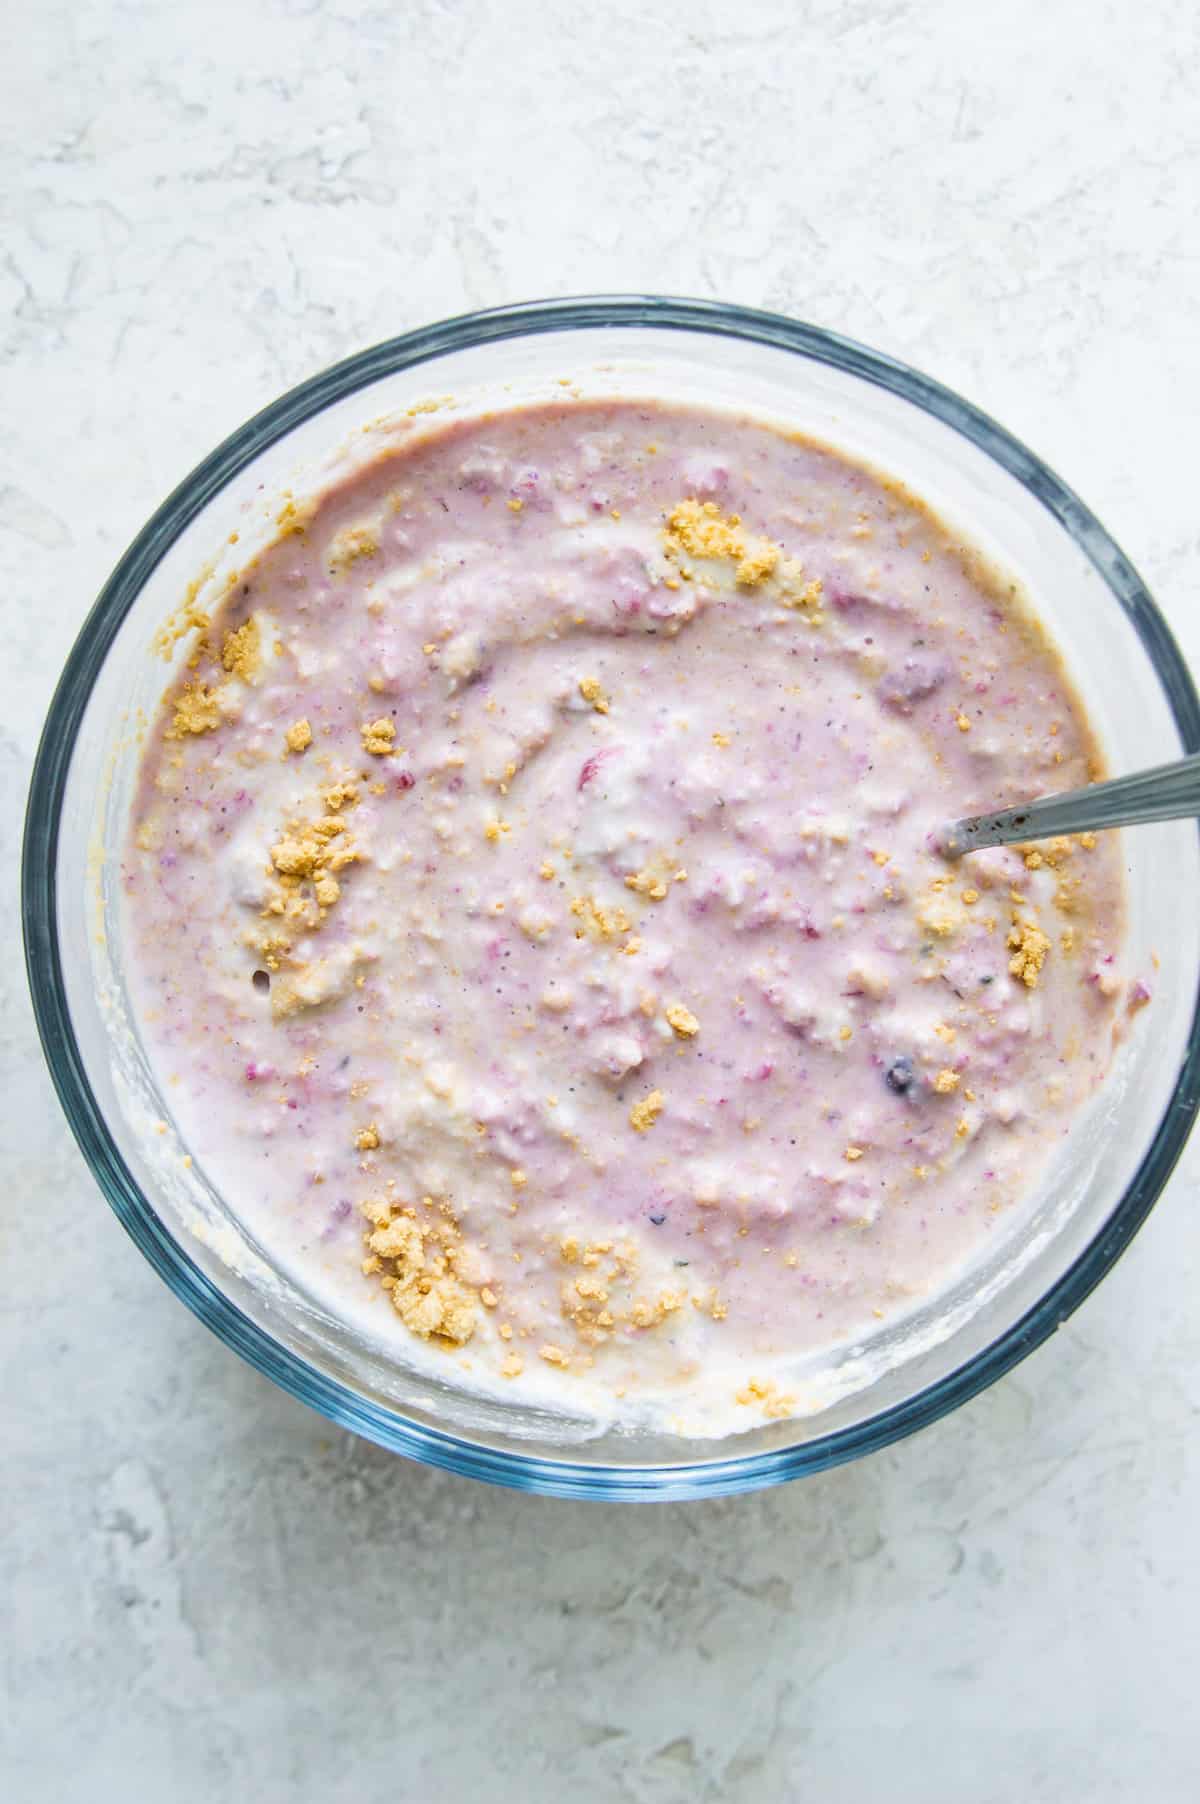 A bowl of overnight oats with graham cracker crumbs sprinkled on it and a spoon in it.